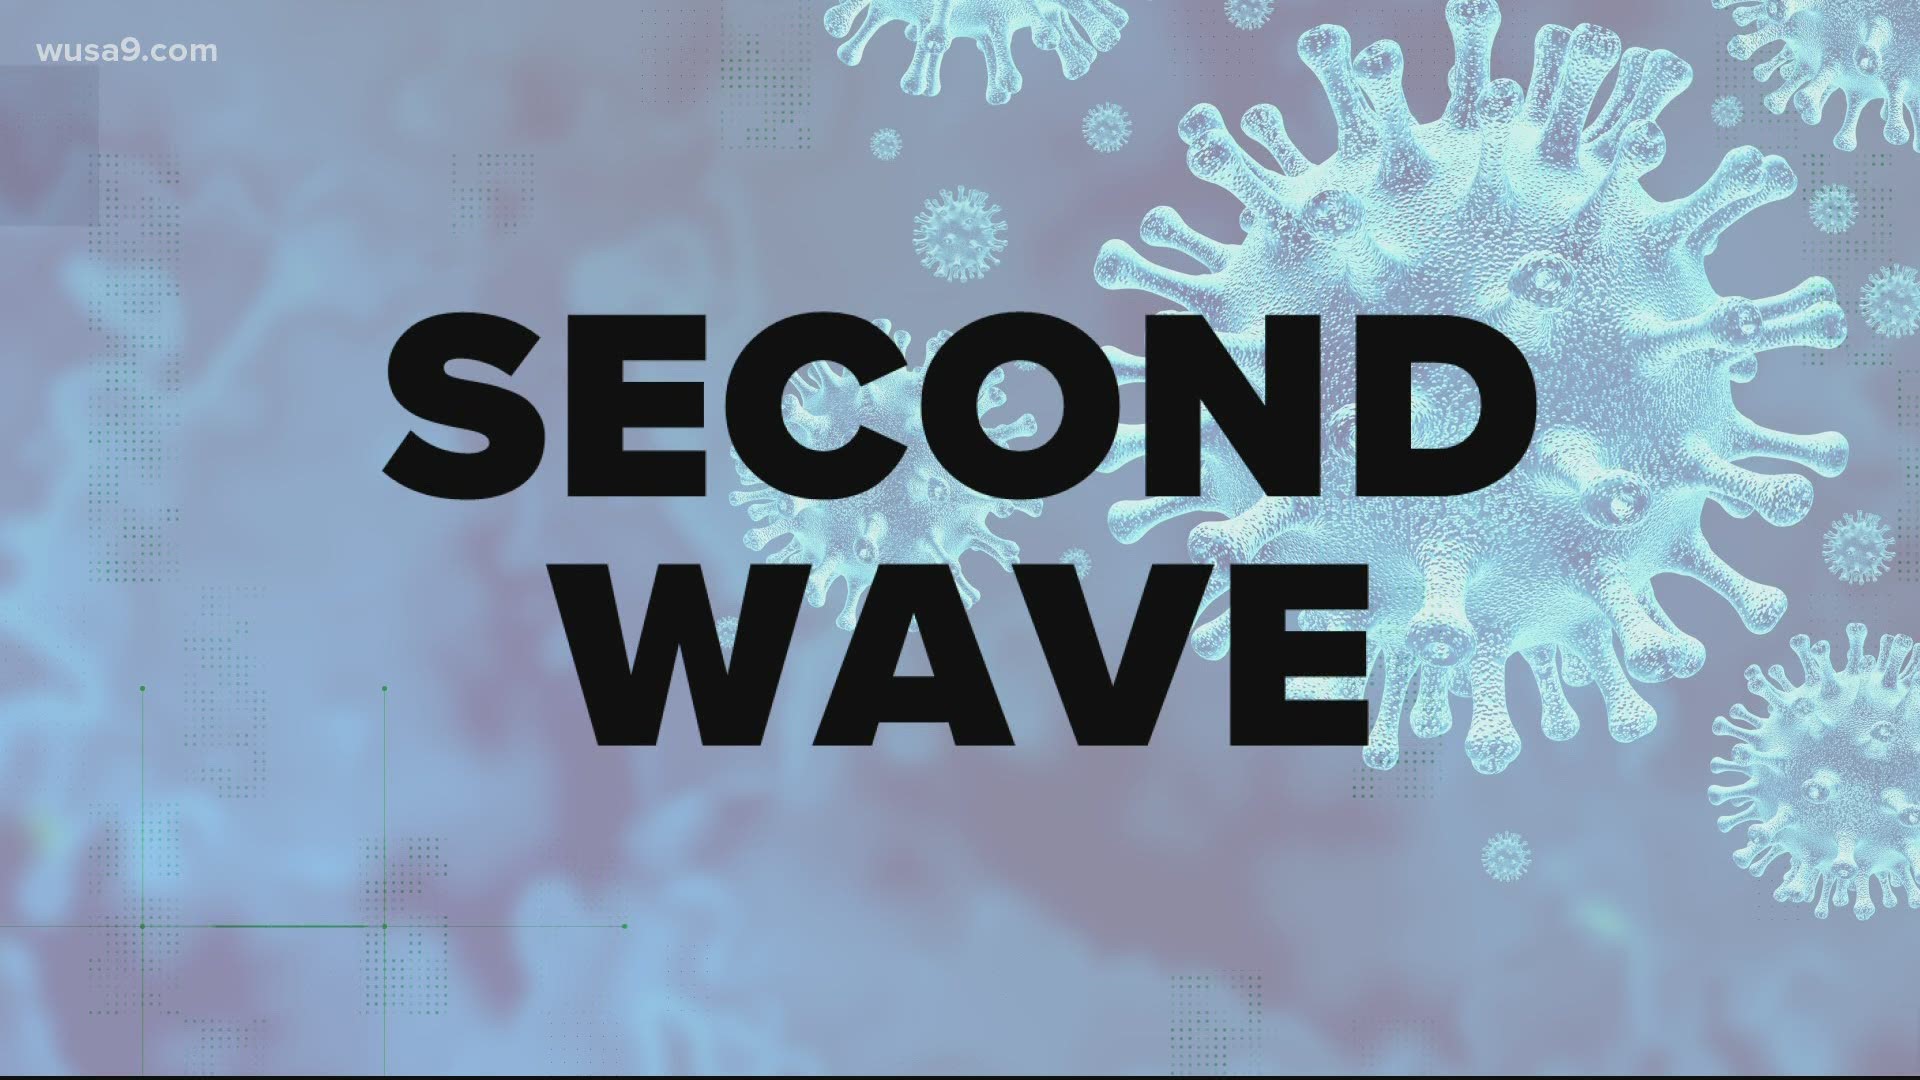 xperts say we will likely see another peak of cases in the fall and winter months. So we're verifying, what is the threshold to qualify as a "second wave?"